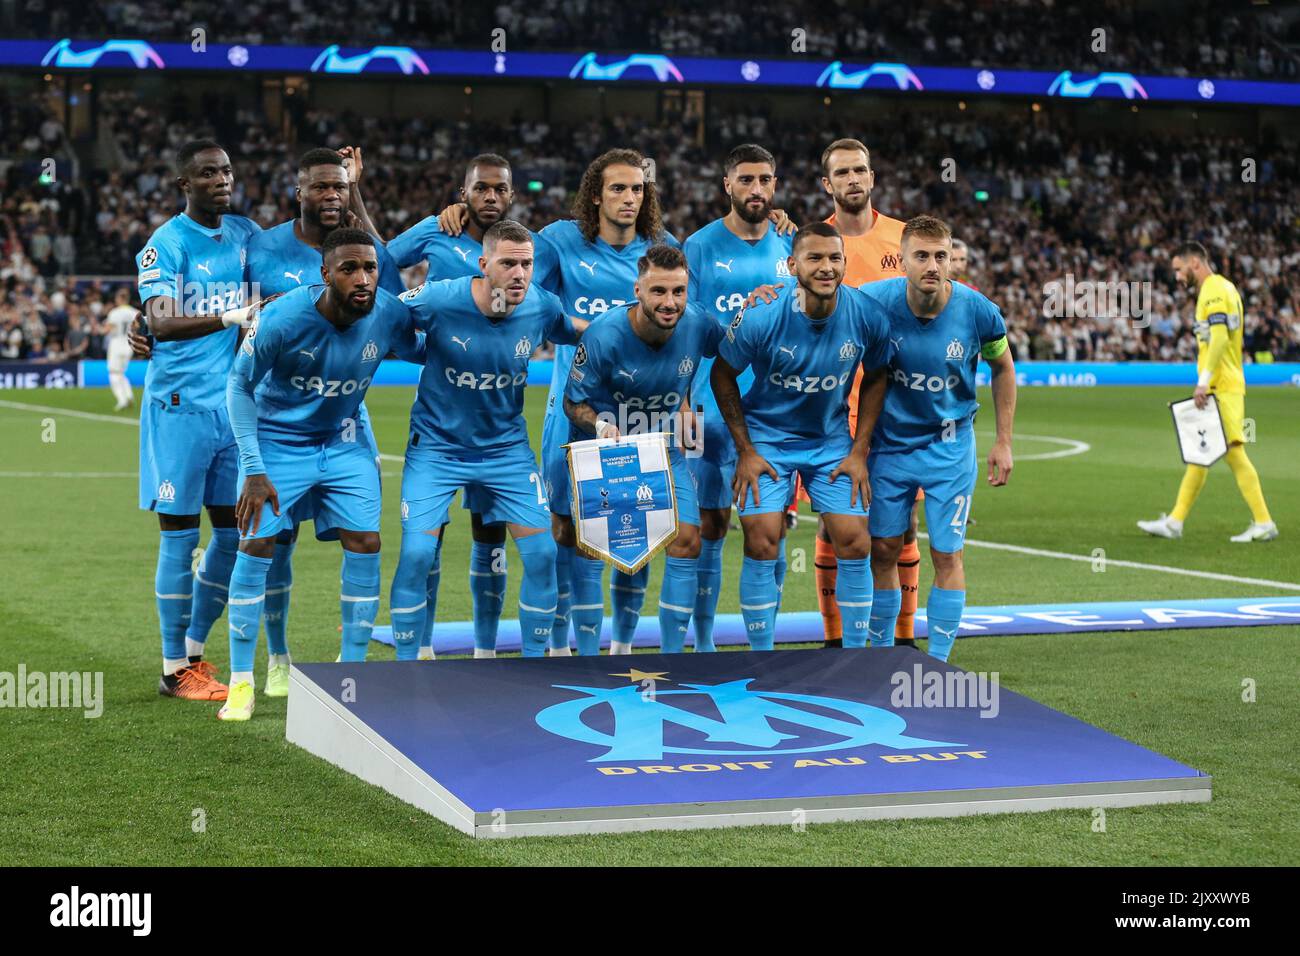 London, UK. 07th Sep, 2022. Marseille team photo during the UEFA Champions League match Tottenham Hotspur vs Marseille at Tottenham Hotspur Stadium, London, United Kingdom, 7th September 2022 (Photo by Arron Gent/News Images) Credit: News Images LTD/Alamy Live News Stock Photo